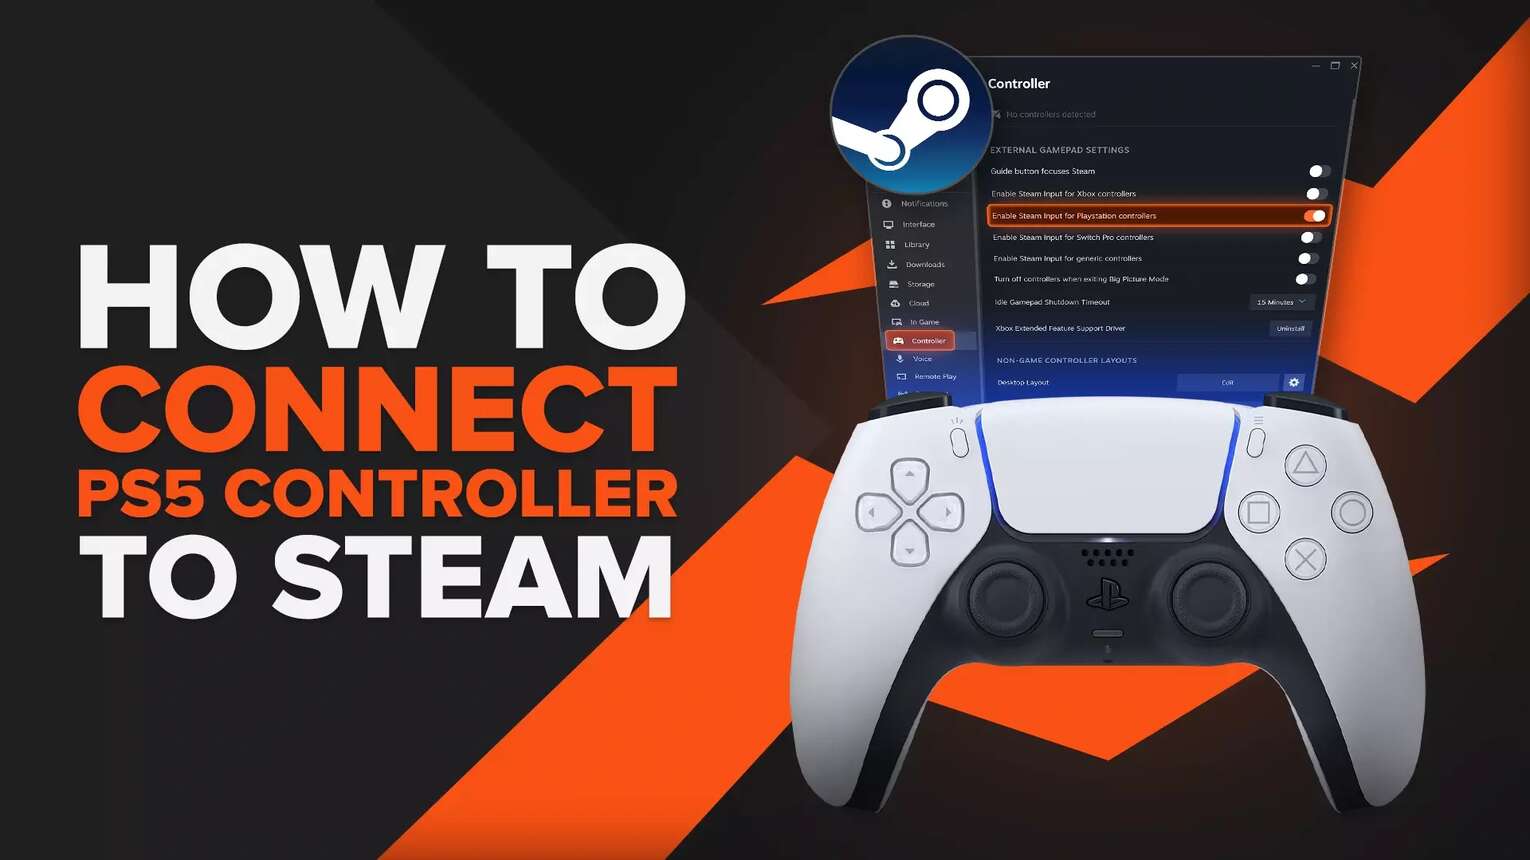 How to Quickly Connect a PS5 Controller to Steam on PC